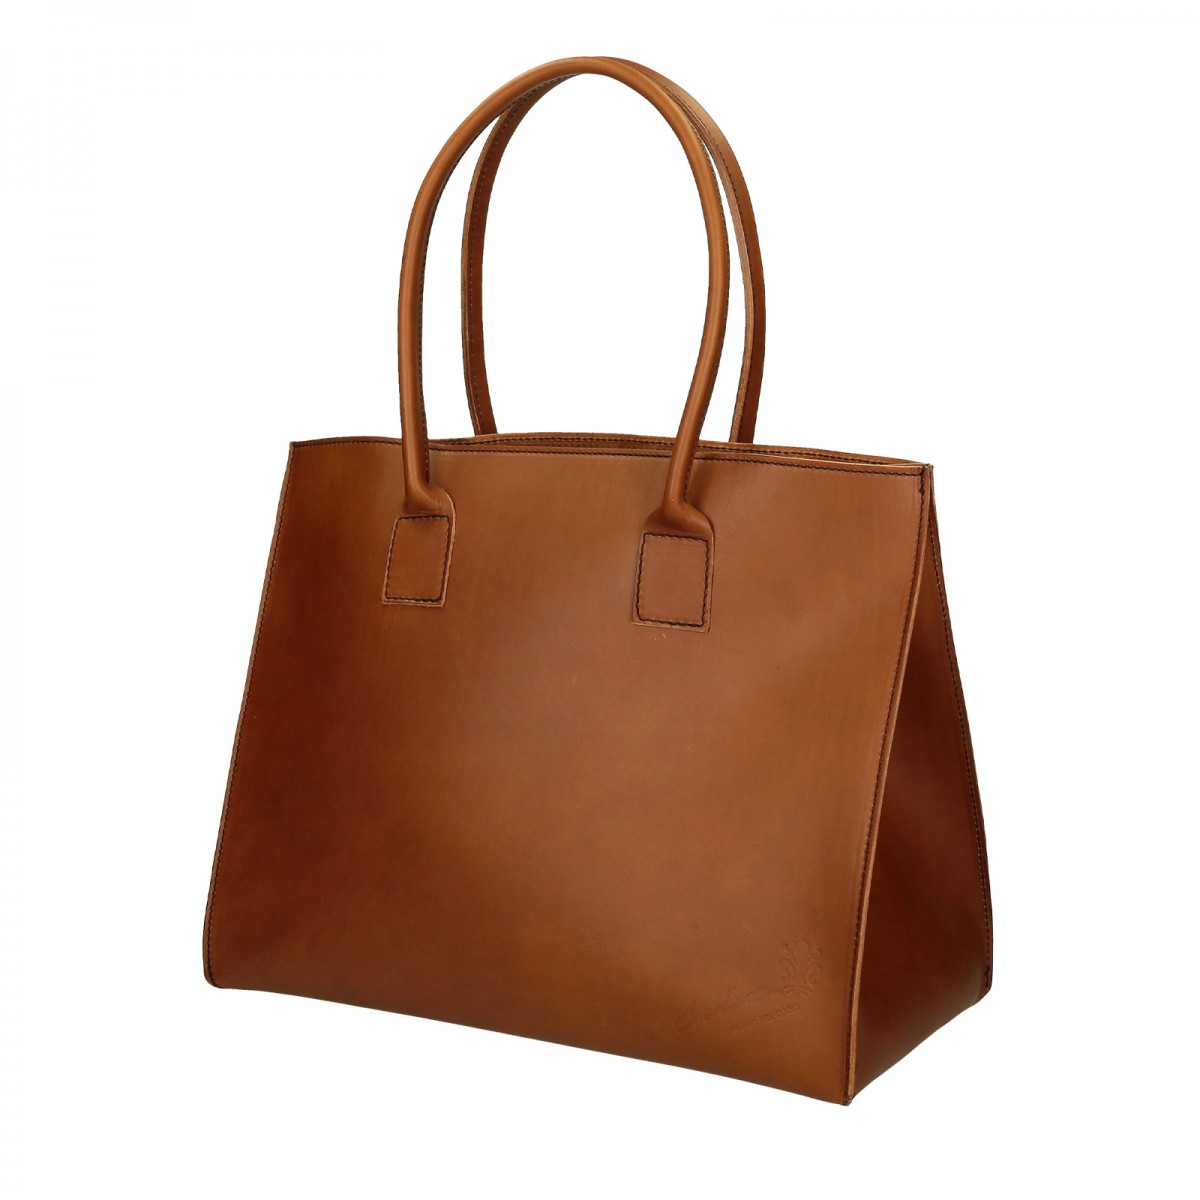 Handmade tote bag for women in tan leather | Gianluca - The leather craftsman